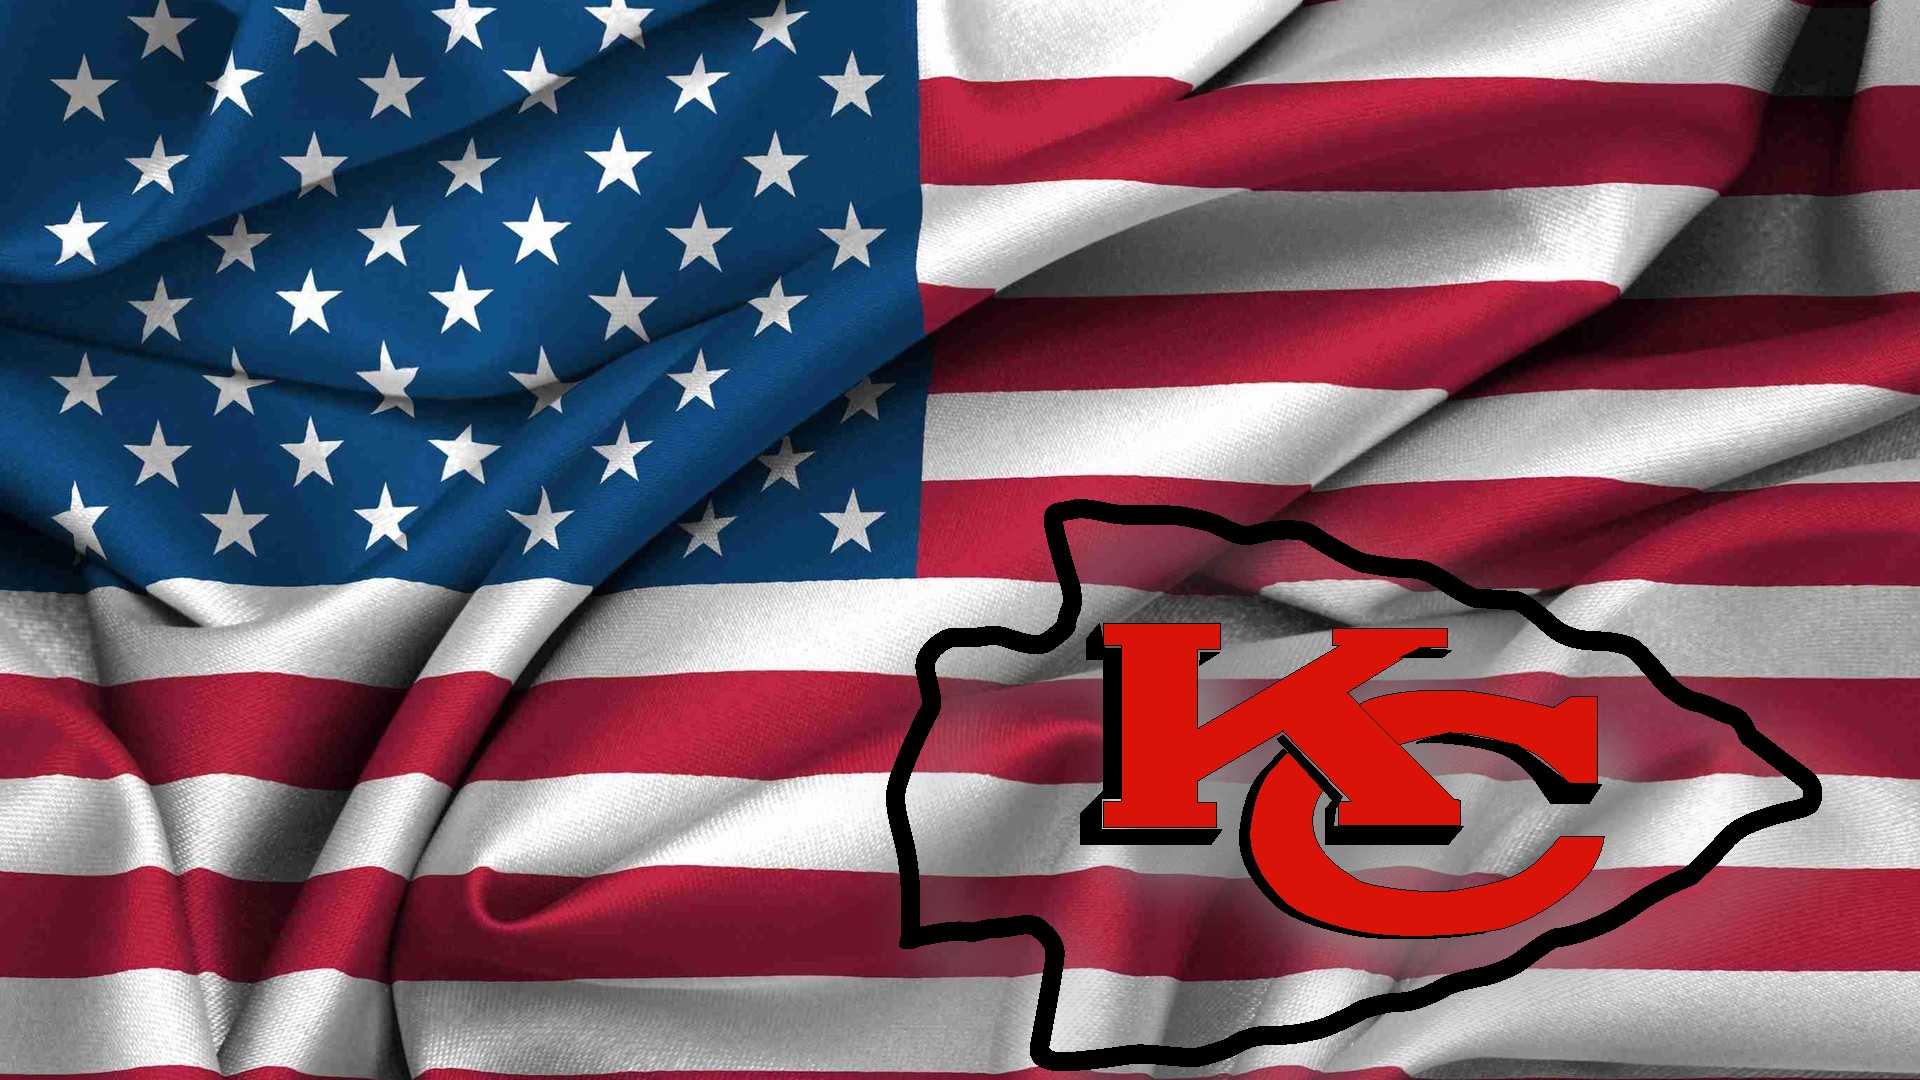 Kansas City Chiefs on X Divisional Round wallpapers   WallpaperWednesday  ChiefsKingdom httpstcoYquhn6Nr1k  X